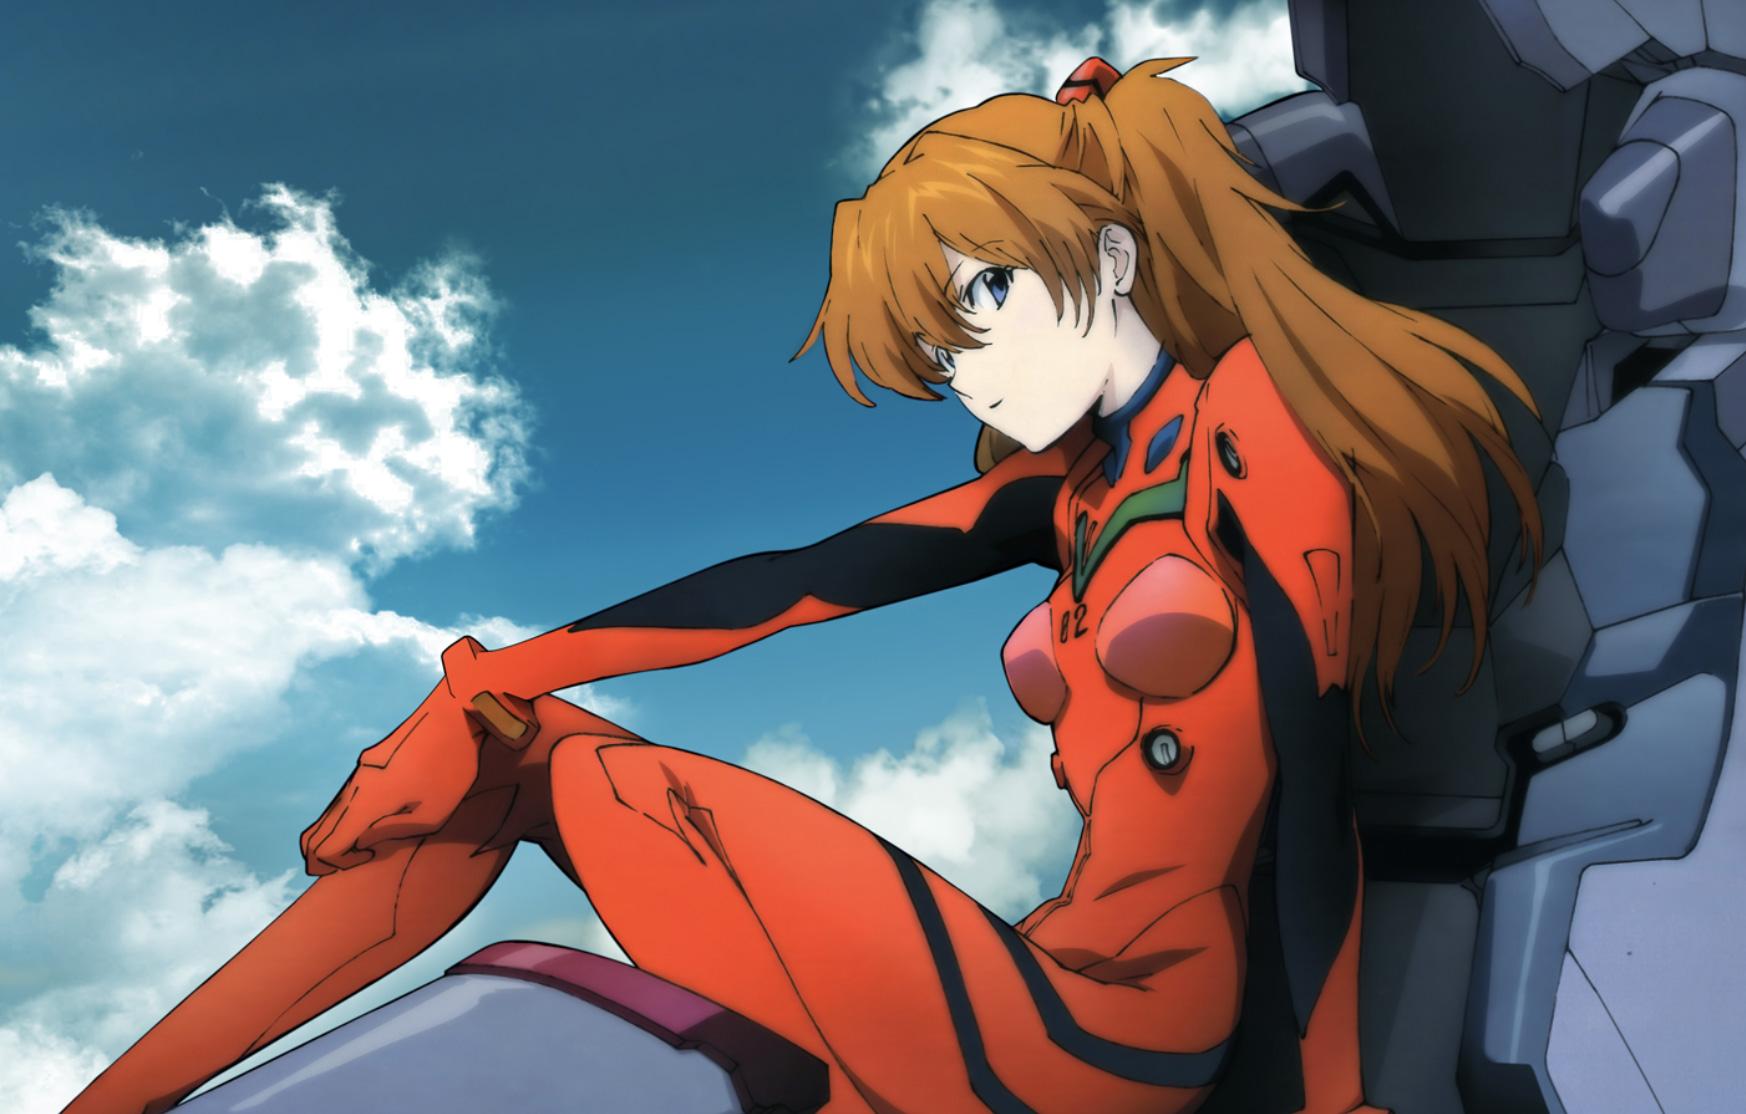 Screenshot of Asuka Langley in Evangelion anime sitting on a mech.